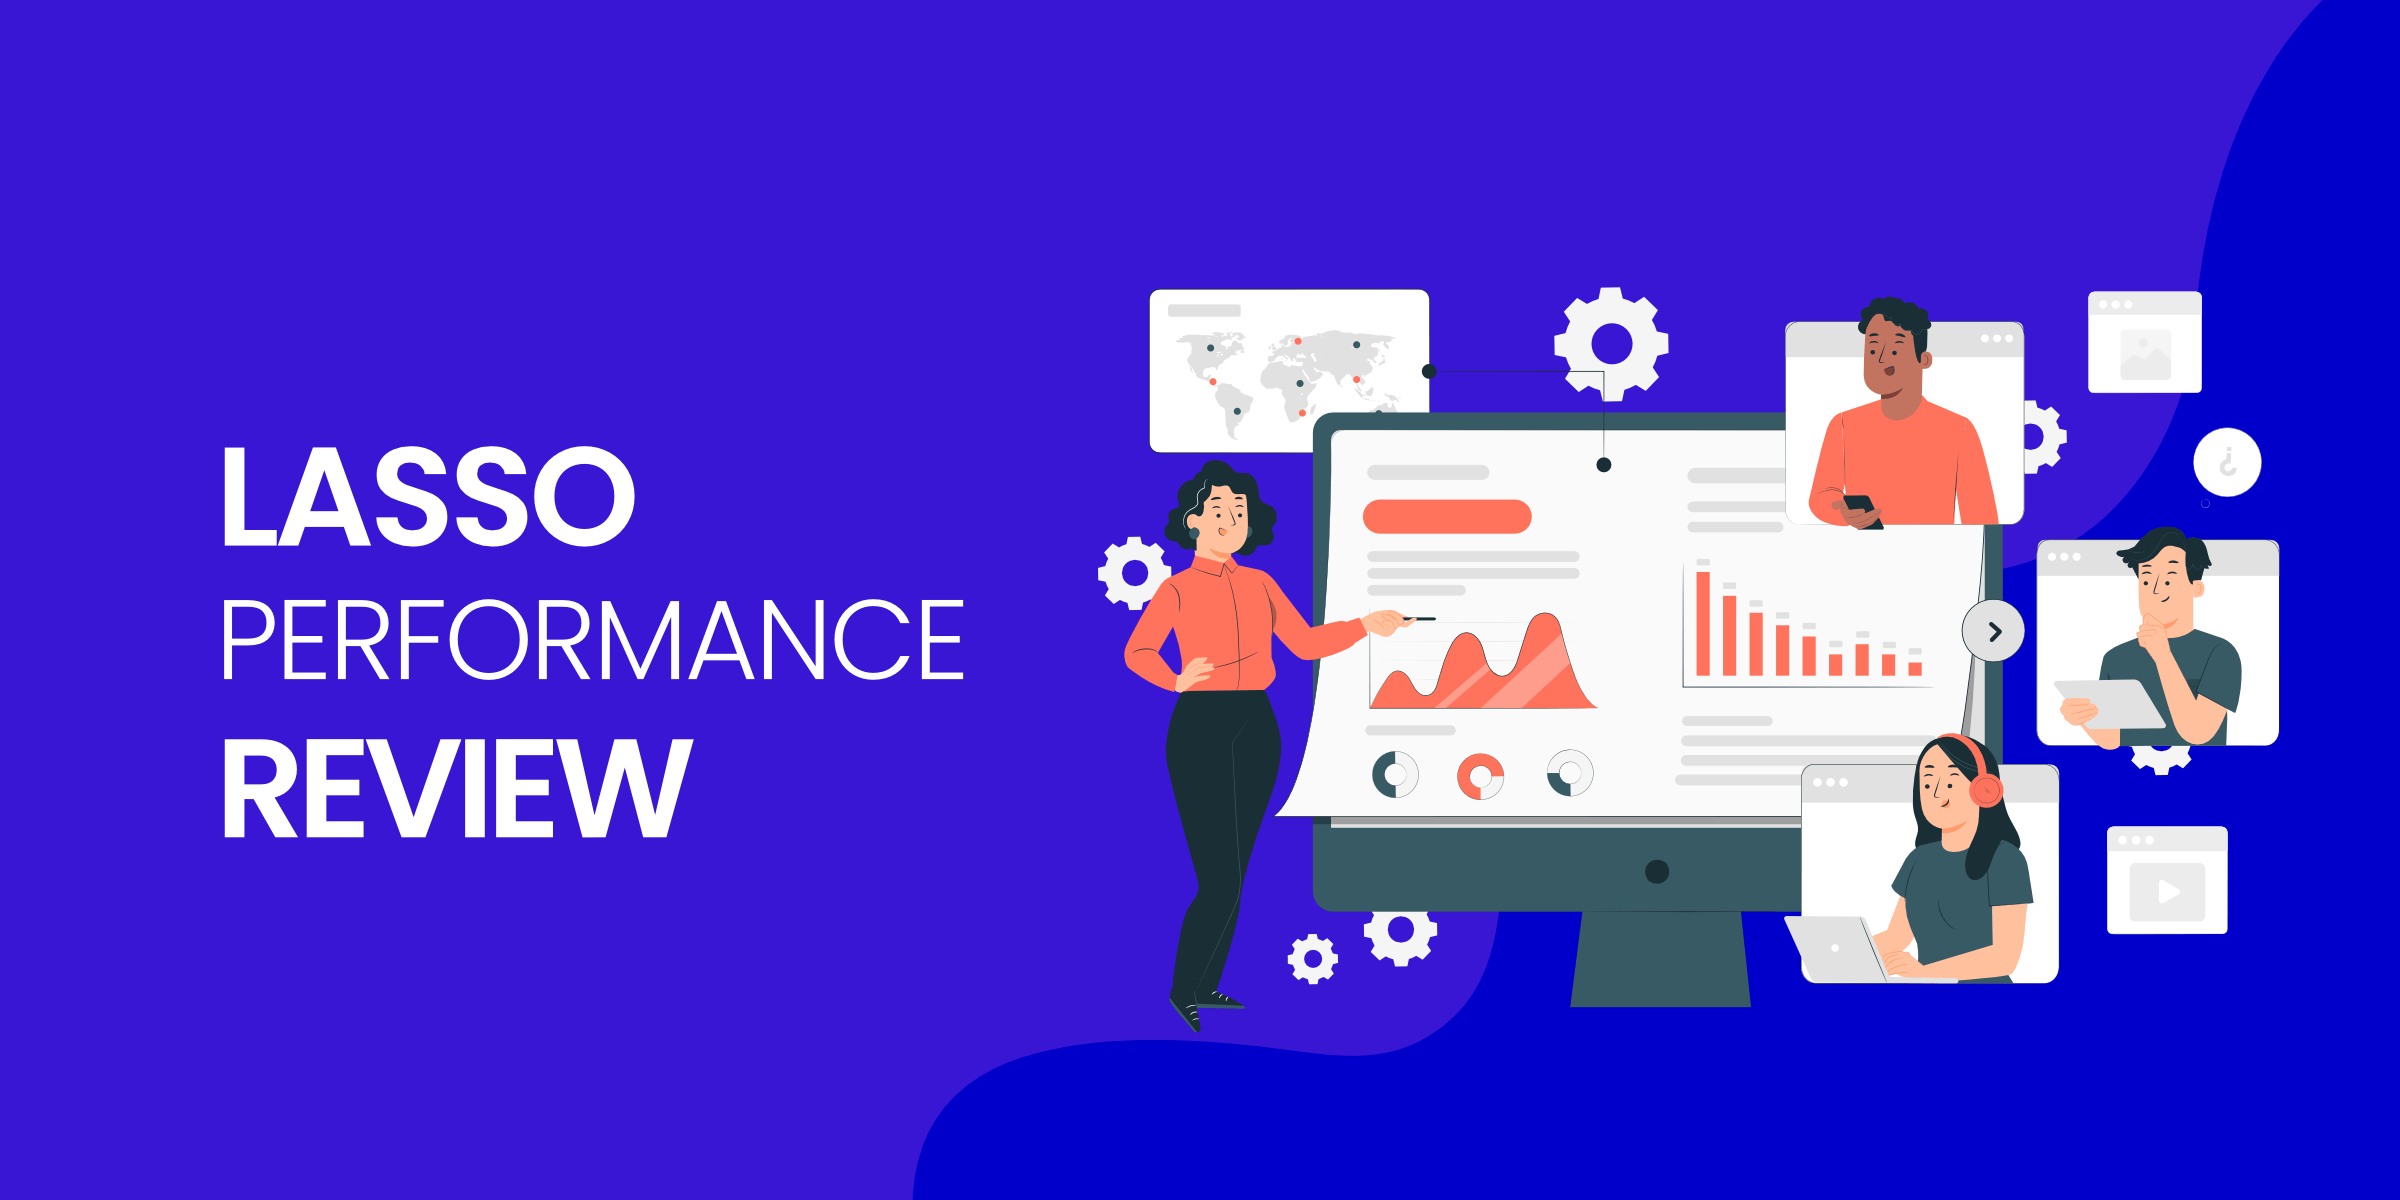 Lasso Performance Review